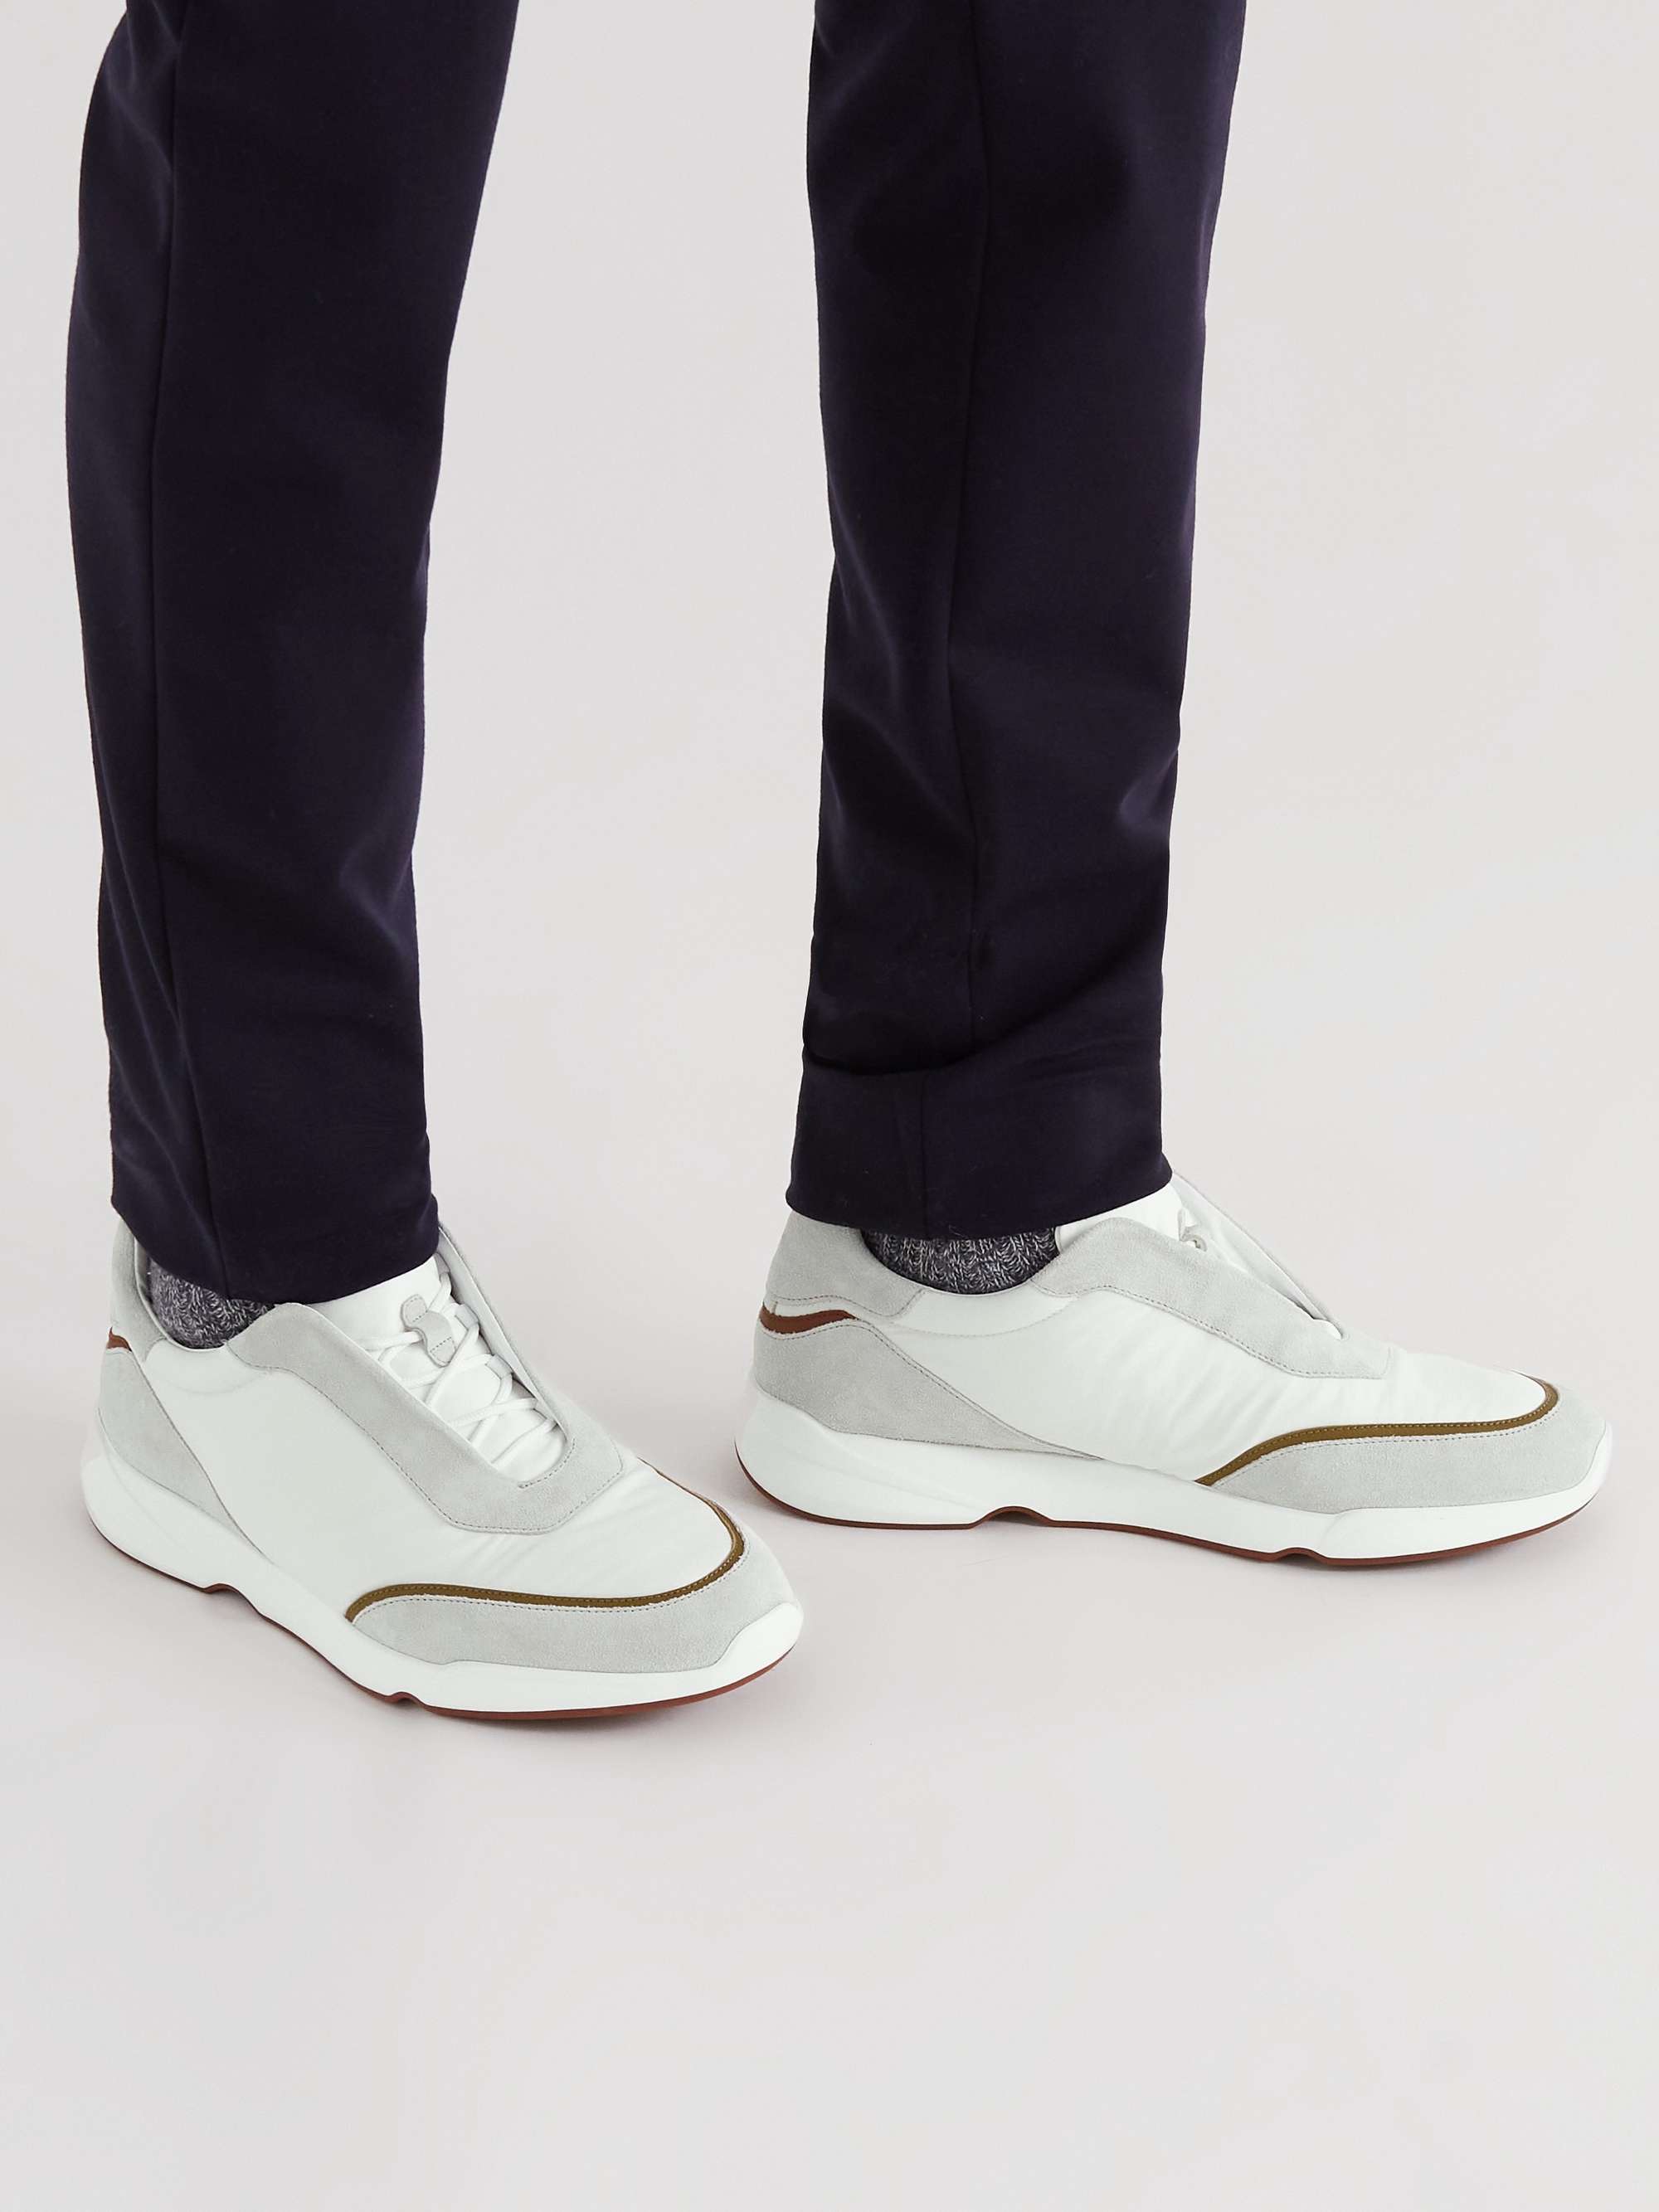 LORO PIANA Modular Walk Leather-Trimmed Canvas and Suede Sneakers